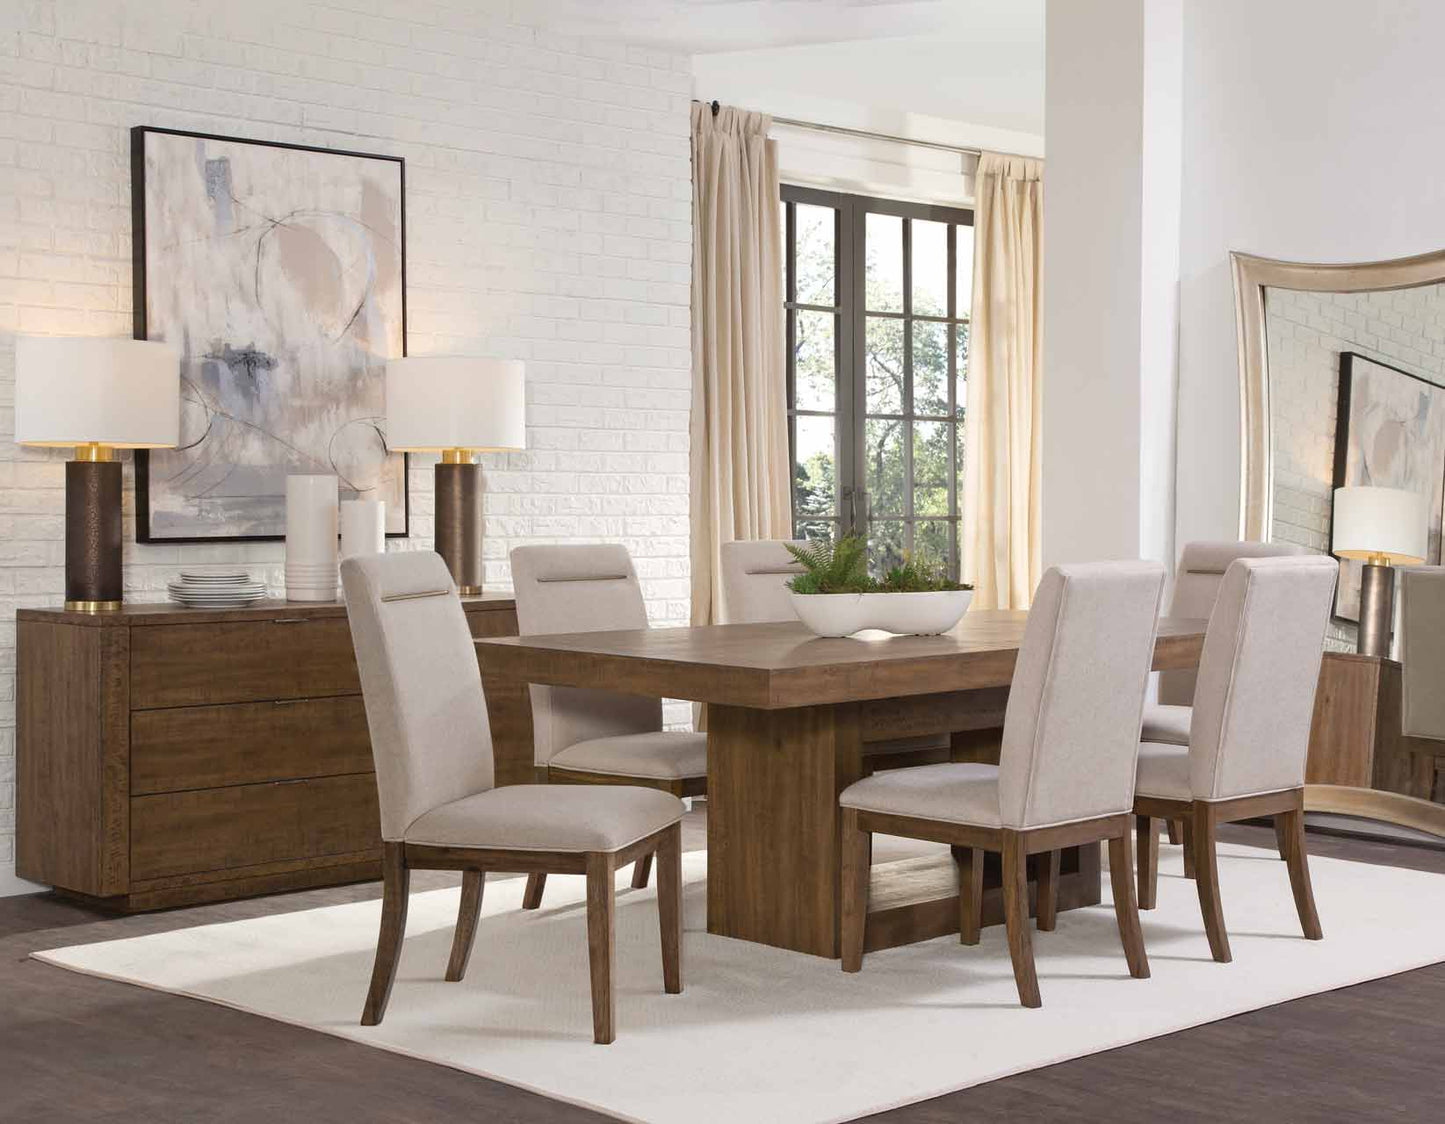 Garland 5-Piece Dining Set
(Table & 4 Side Chairs)